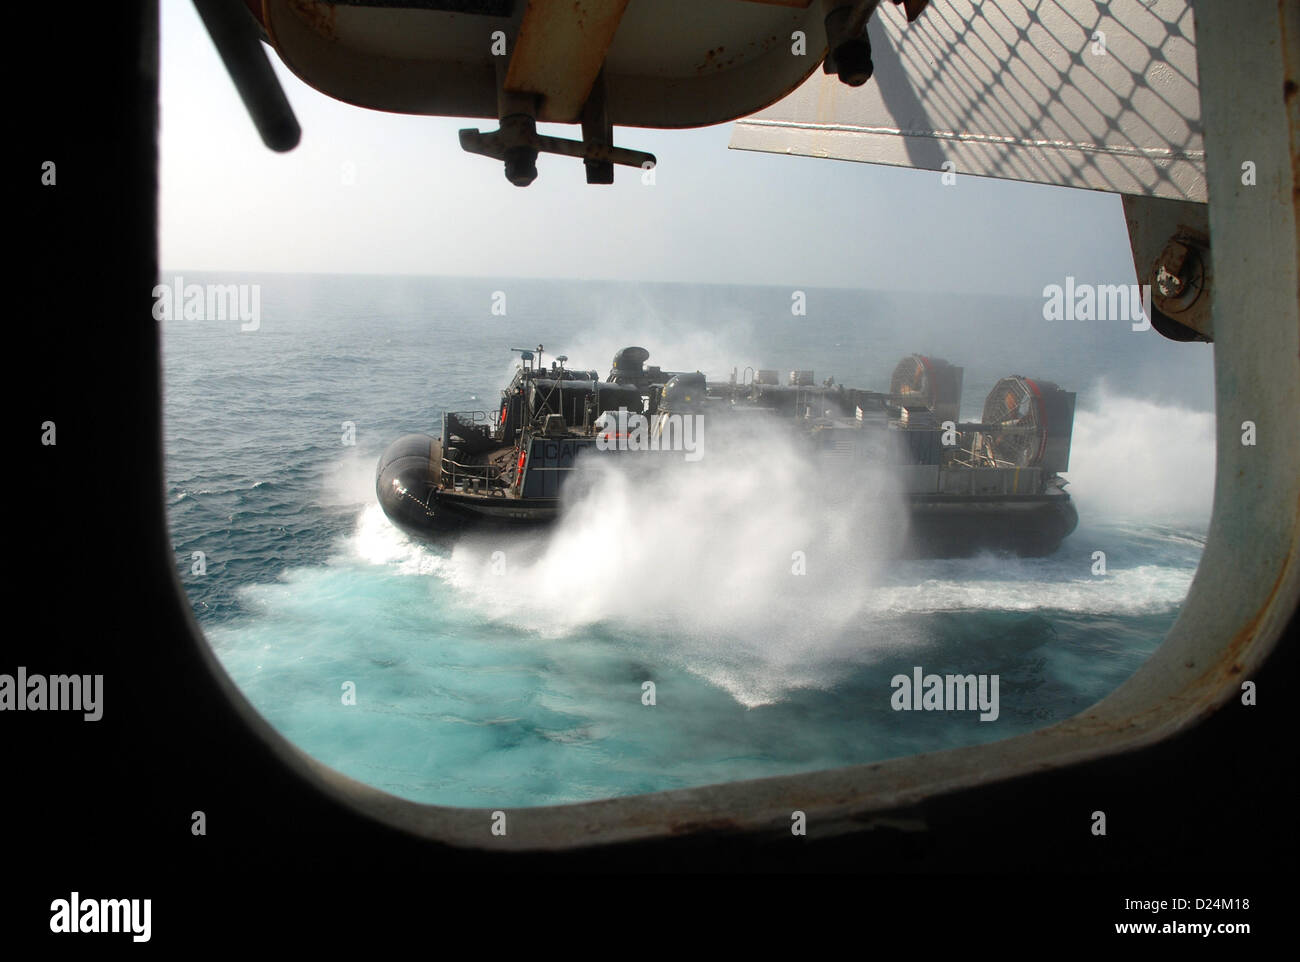 A landing craft, air cushion (LCAC) departs amphibious transport dock ship USS Green Bay (LPD 20).  Green Bay is part of the Peleliu Amphibious Ready Group and, with embarked 15th Marine Expeditionary Unit, is deployed in support of maritime security operations and theater security cooperation efforts in the U.S. 5th Fleet area of responsibility. . Jan 14, 2013  (U.S. Navy photo) Stock Photo